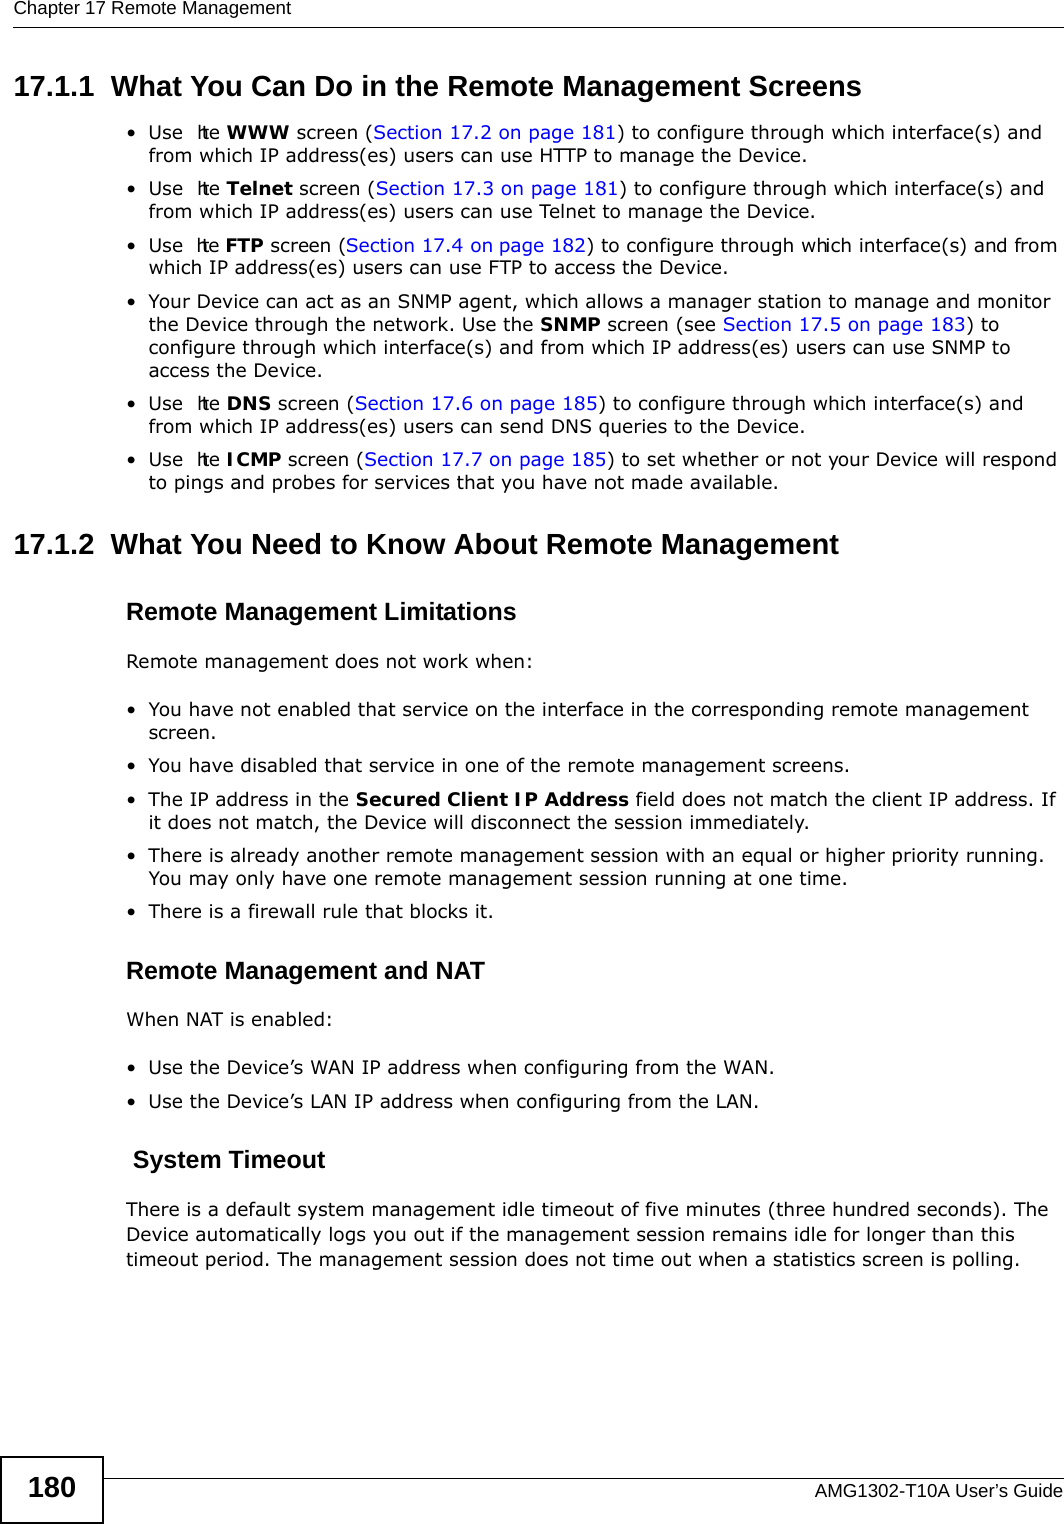 Chapter 17 Remote ManagementAMG1302-T10A User’s Guide18017.1.1  What You Can Do in the Remote Management Screens•Use  the WWW screen (Section 17.2 on page 181) to configure through which interface(s) and from which IP address(es) users can use HTTP to manage the Device.•Use  the Telnet screen (Section 17.3 on page 181) to configure through which interface(s) and from which IP address(es) users can use Telnet to manage the Device.•Use  the FTP screen (Section 17.4 on page 182) to configure through which interface(s) and from which IP address(es) users can use FTP to access the Device.• Your Device can act as an SNMP agent, which allows a manager station to manage and monitor the Device through the network. Use the SNMP screen (see Section 17.5 on page 183) to configure through which interface(s) and from which IP address(es) users can use SNMP to access the Device.•Use  the DNS screen (Section 17.6 on page 185) to configure through which interface(s) and from which IP address(es) users can send DNS queries to the Device.•Use  the ICMP screen (Section 17.7 on page 185) to set whether or not your Device will respond to pings and probes for services that you have not made available.17.1.2  What You Need to Know About Remote ManagementRemote Management LimitationsRemote management does not work when:• You have not enabled that service on the interface in the corresponding remote management screen.• You have disabled that service in one of the remote management screens.• The IP address in the Secured Client IP Address field does not match the client IP address. If it does not match, the Device will disconnect the session immediately.• There is already another remote management session with an equal or higher priority running. You may only have one remote management session running at one time.• There is a firewall rule that blocks it.Remote Management and NATWhen NAT is enabled:• Use the Device’s WAN IP address when configuring from the WAN. • Use the Device’s LAN IP address when configuring from the LAN. System TimeoutThere is a default system management idle timeout of five minutes (three hundred seconds). The Device automatically logs you out if the management session remains idle for longer than this timeout period. The management session does not time out when a statistics screen is polling. 